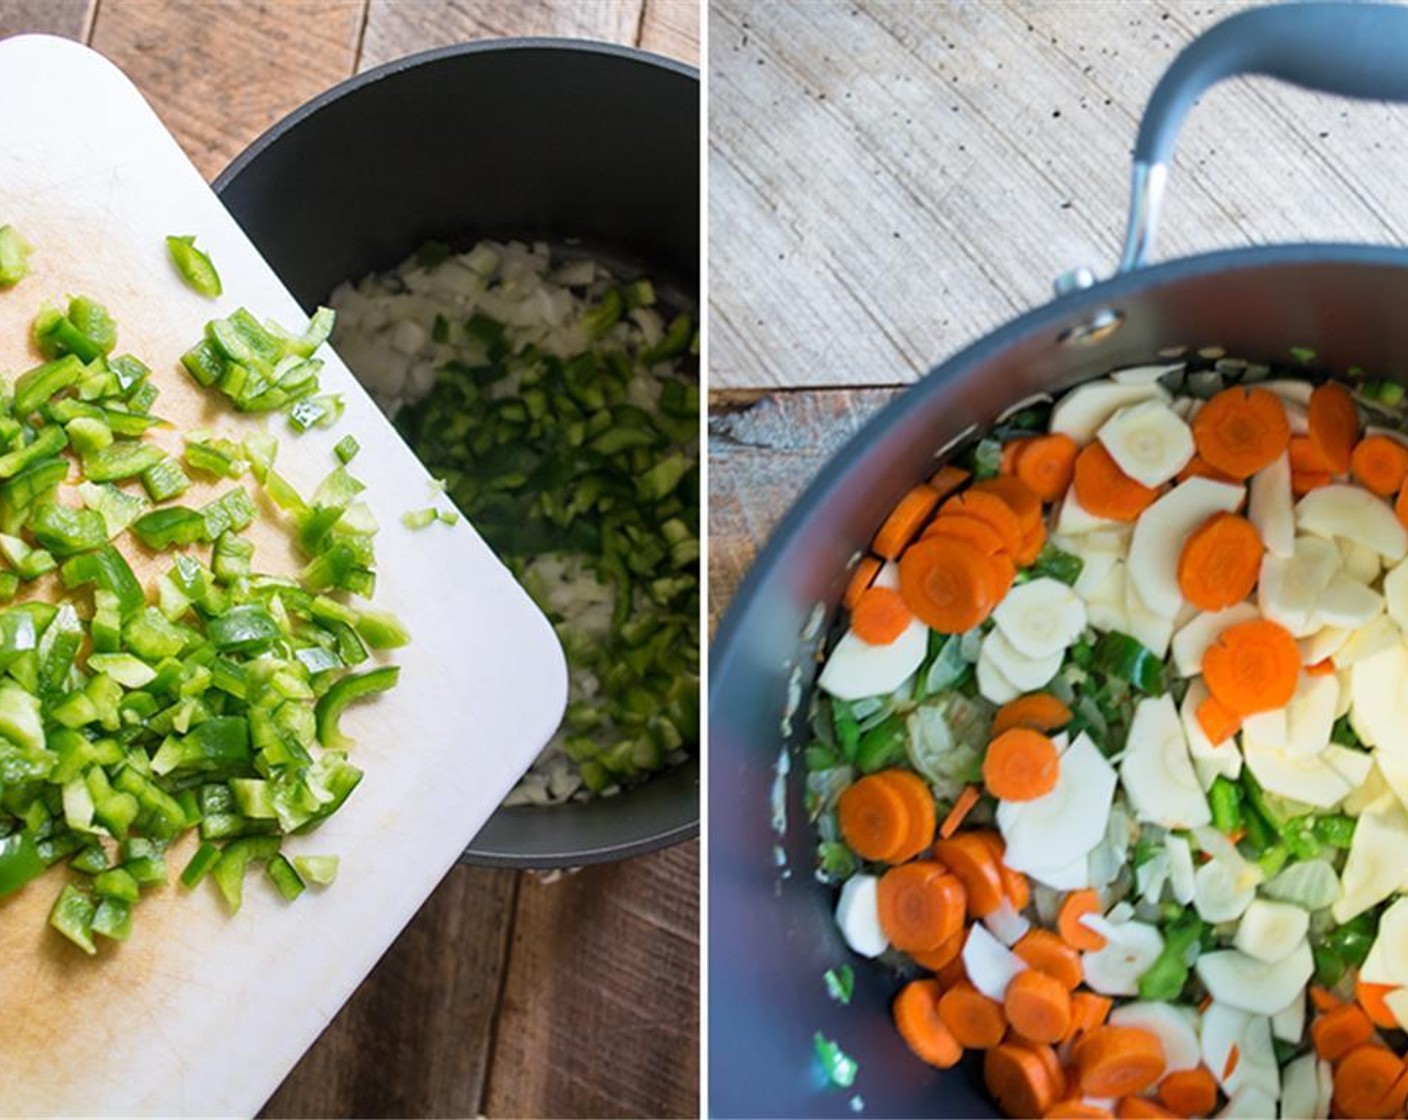 step 1 Using a large pot, saute Onions (2) and Garlic (4 cloves) in Coconut Oil (1 Tbsp) for 2-3 minutes. Add Sweet Potatoes (3), Carrots (3), Parsnips (3), and Bell Peppers (2) and continue cooking until onions are soft and translucent, 5 to 7 minutes.